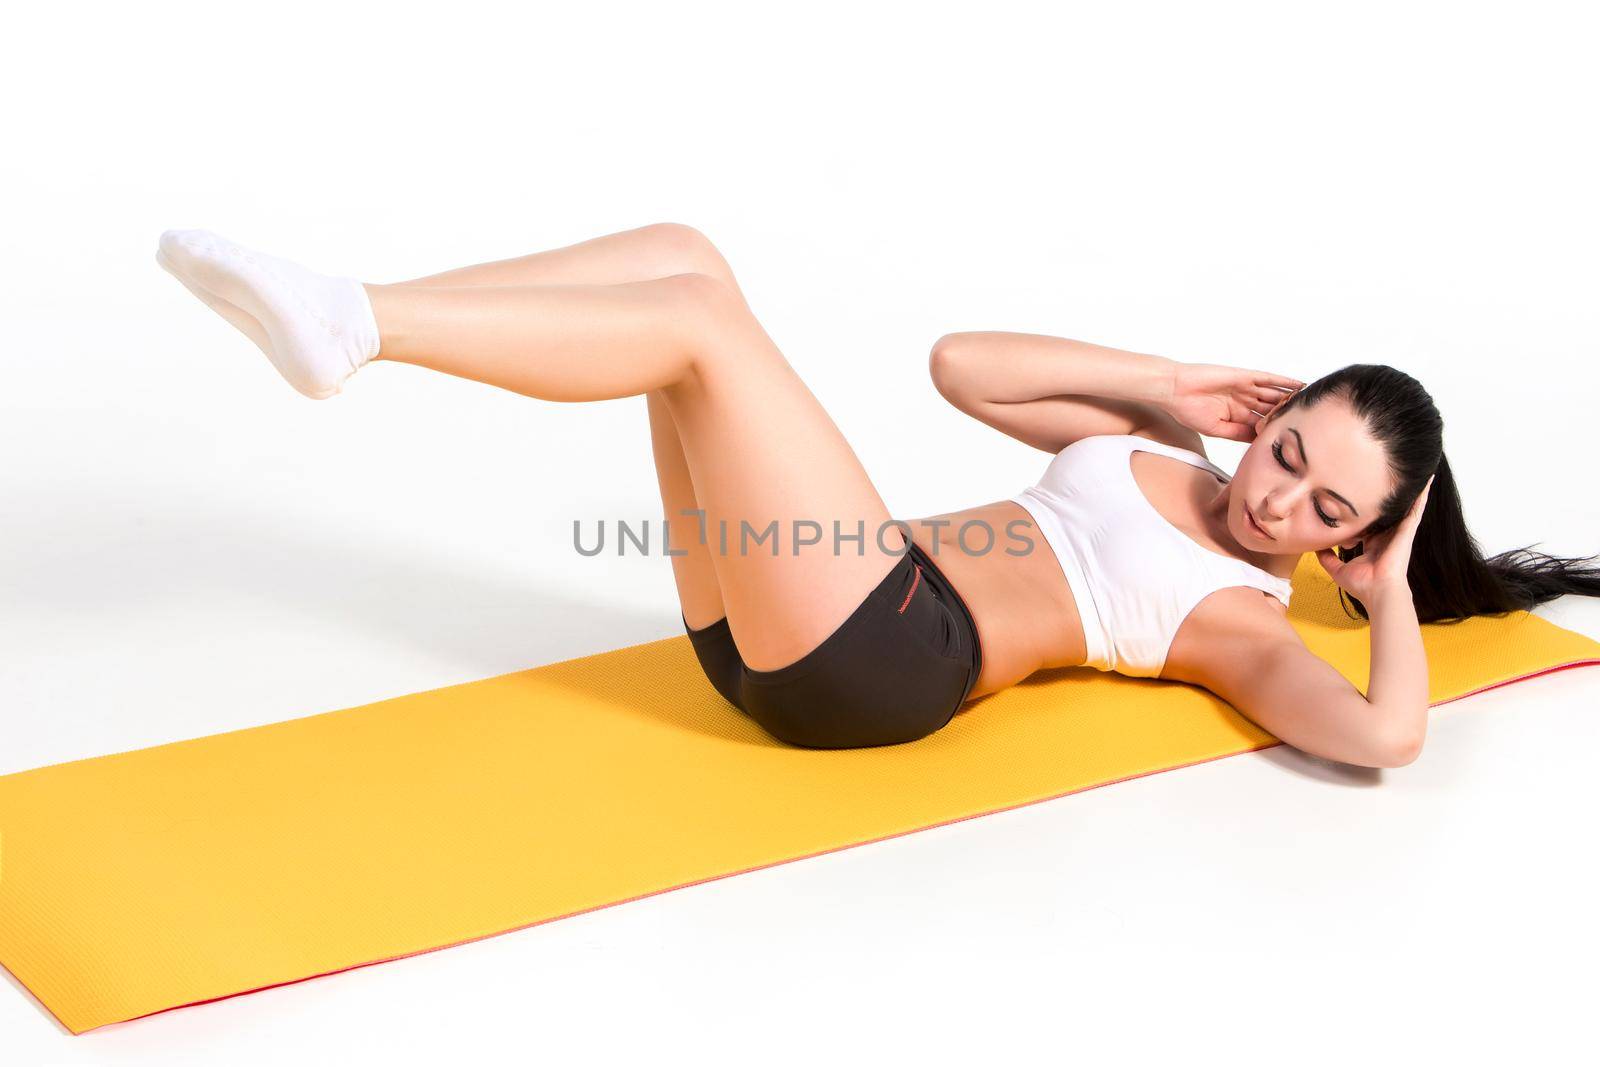 Portrait of young attractive woman doing exercises. Brunette with fit body on yoga mat. Healthy lifestyle and sports concept. Series of exercise poses.